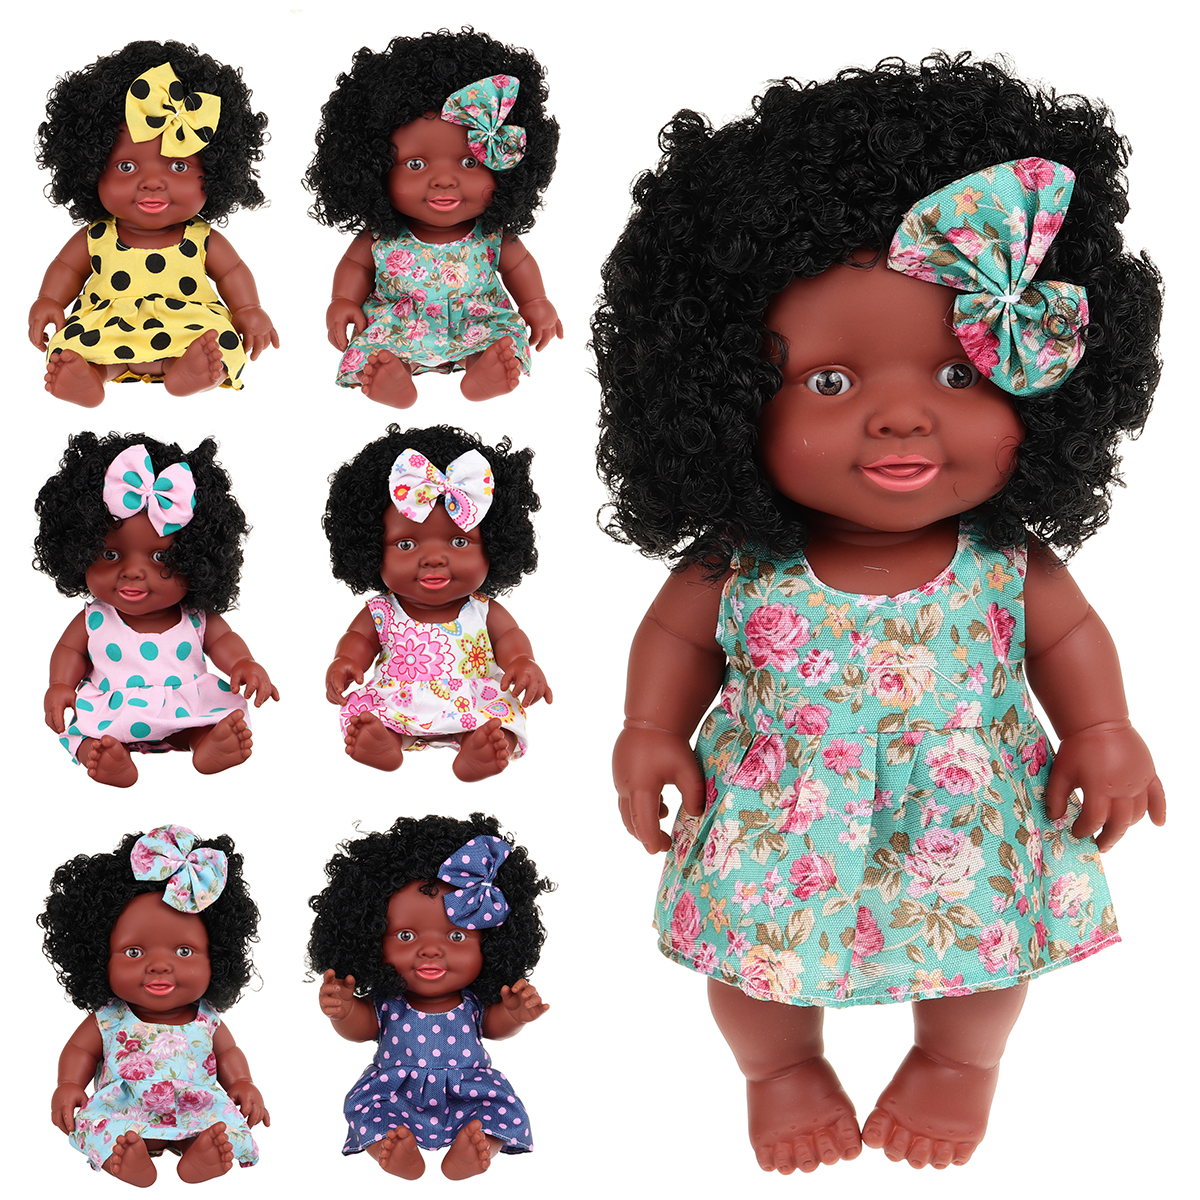 25CM-Cute-Soft-Silicone-Joint-Movable-Lifelike-Realistic-African-Black-Reborn-Baby-Doll-for-Kids-Gif-1733542-3